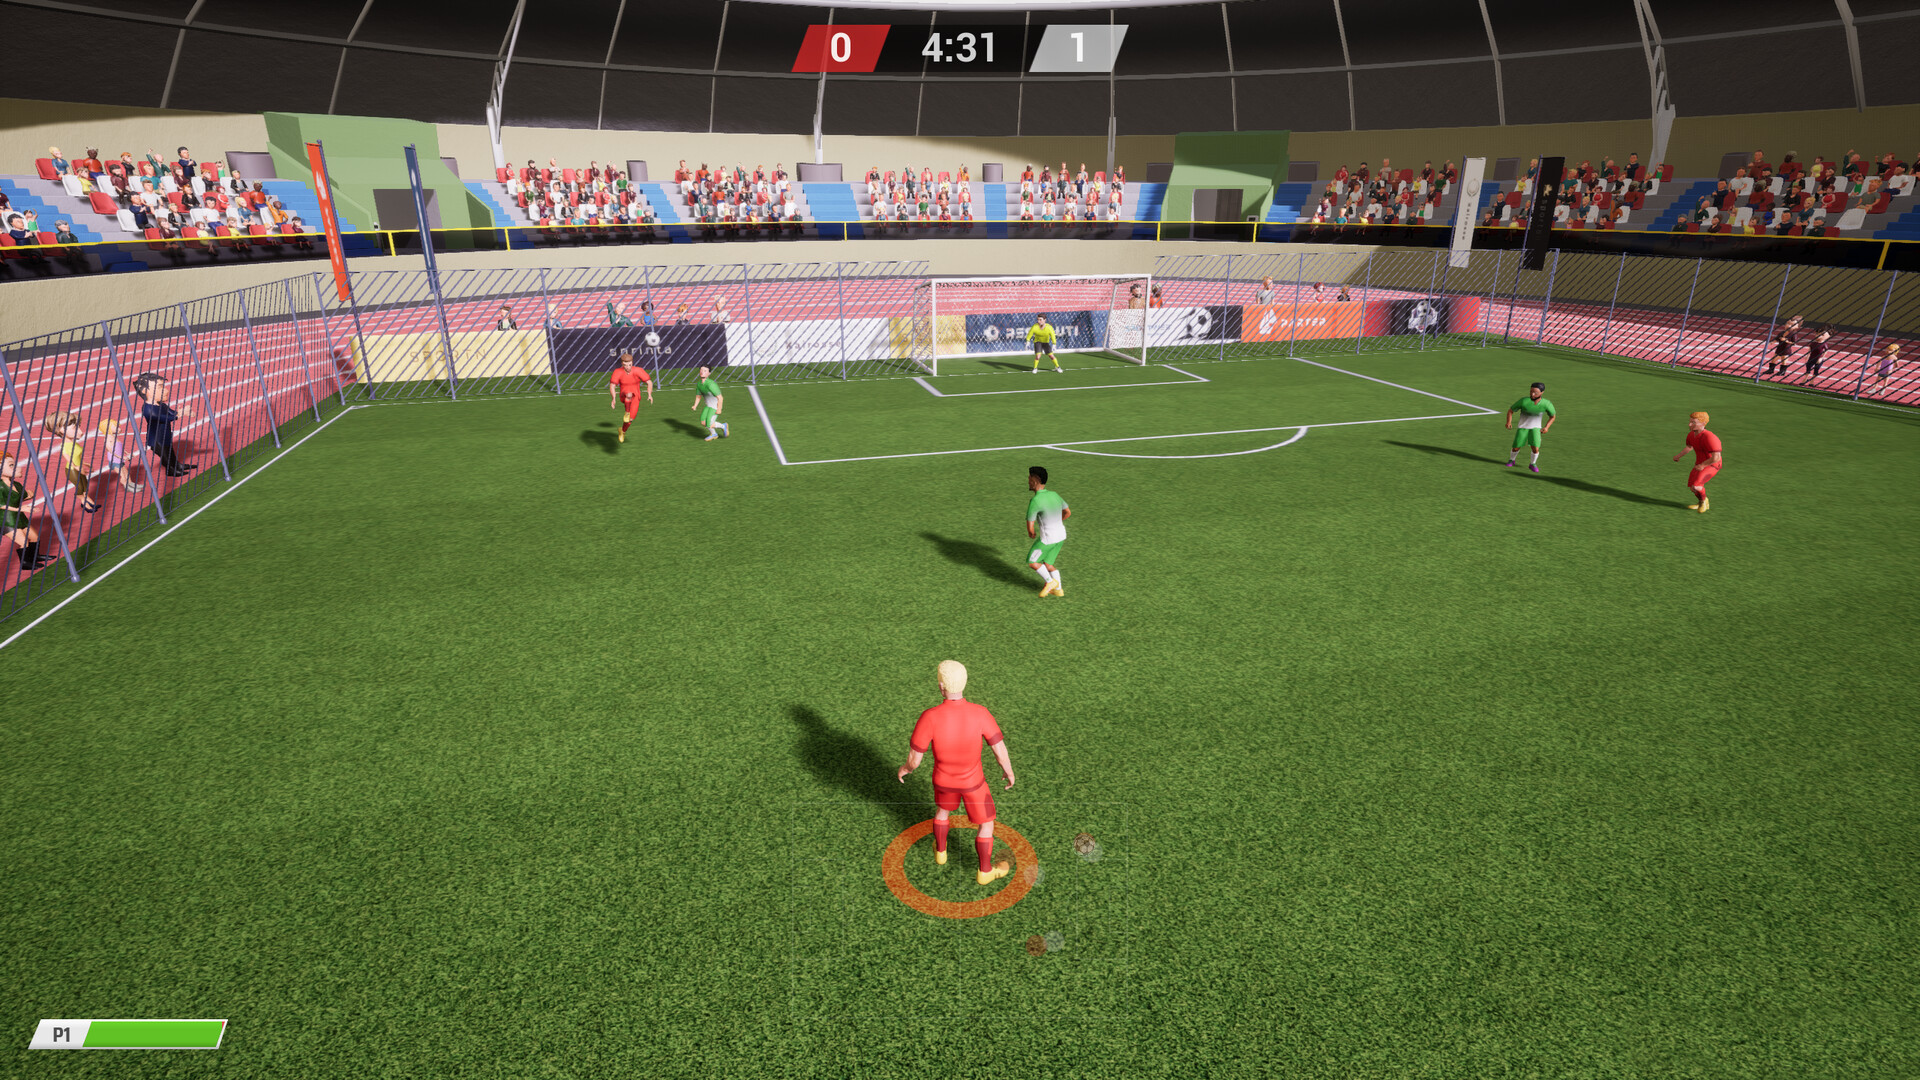 Play with your friends on steam for free! #f2p #steam #football #socce